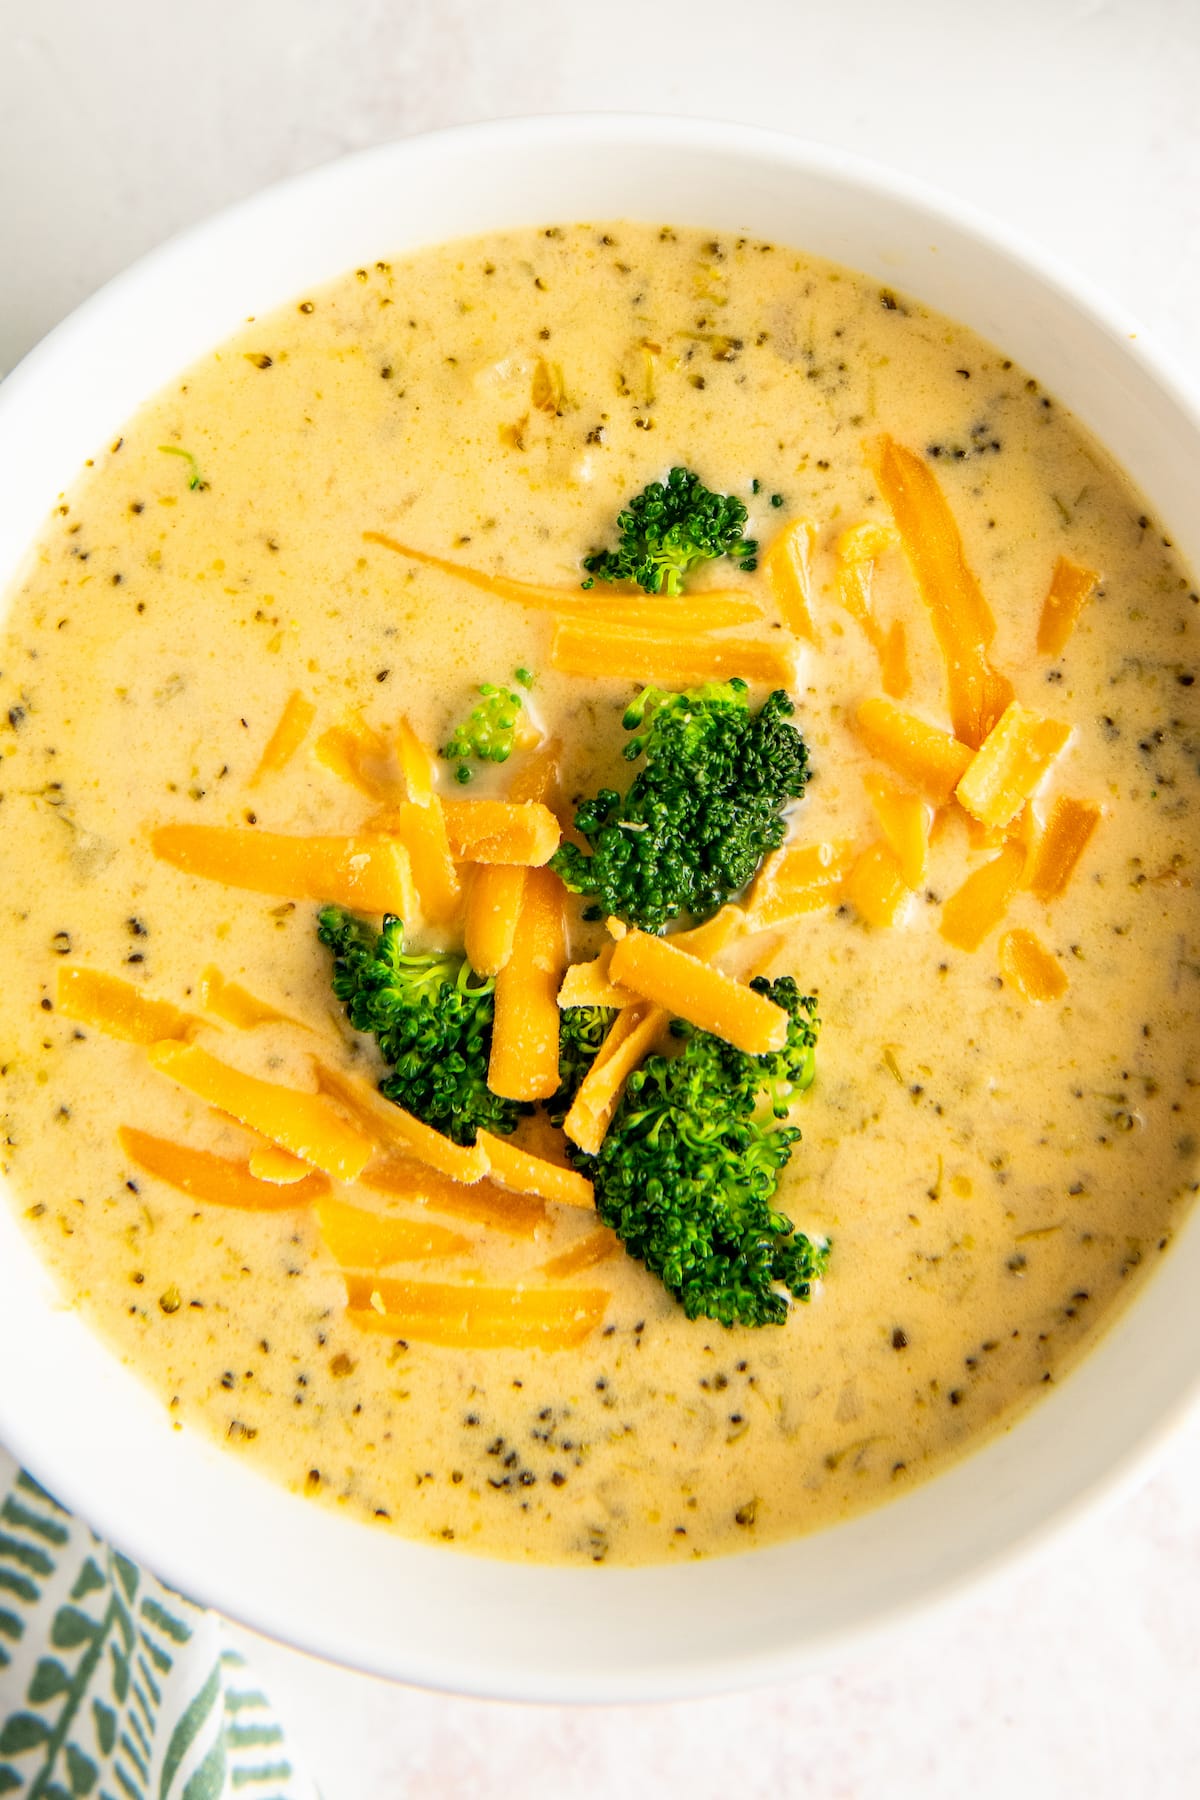 Overhead shot of crockpot broccoli cheese soup garnished with broccoli and shredded cheddar.